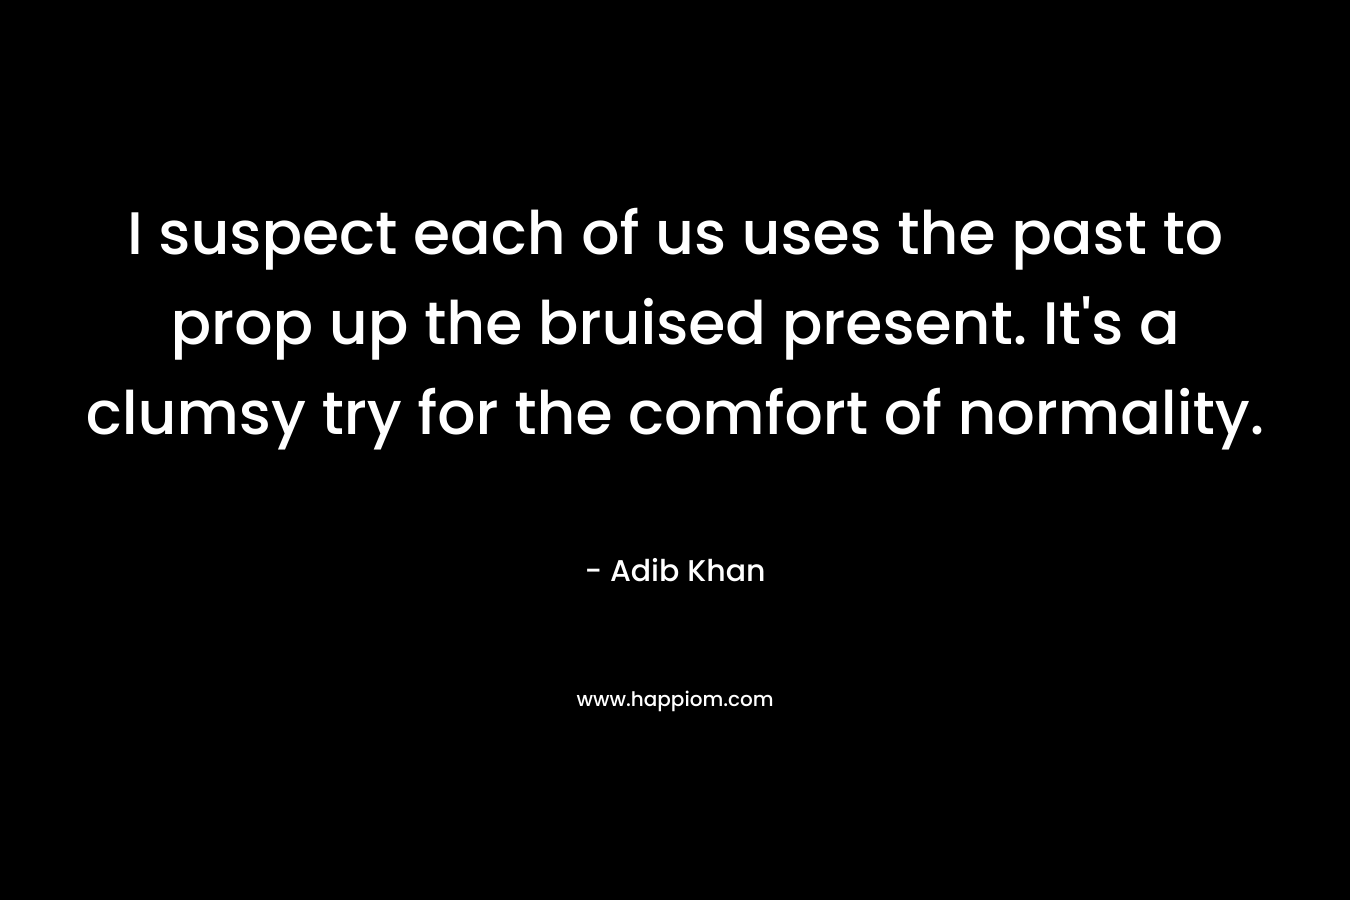 I suspect each of us uses the past to prop up the bruised present. It’s a clumsy try for the comfort of normality. – Adib Khan